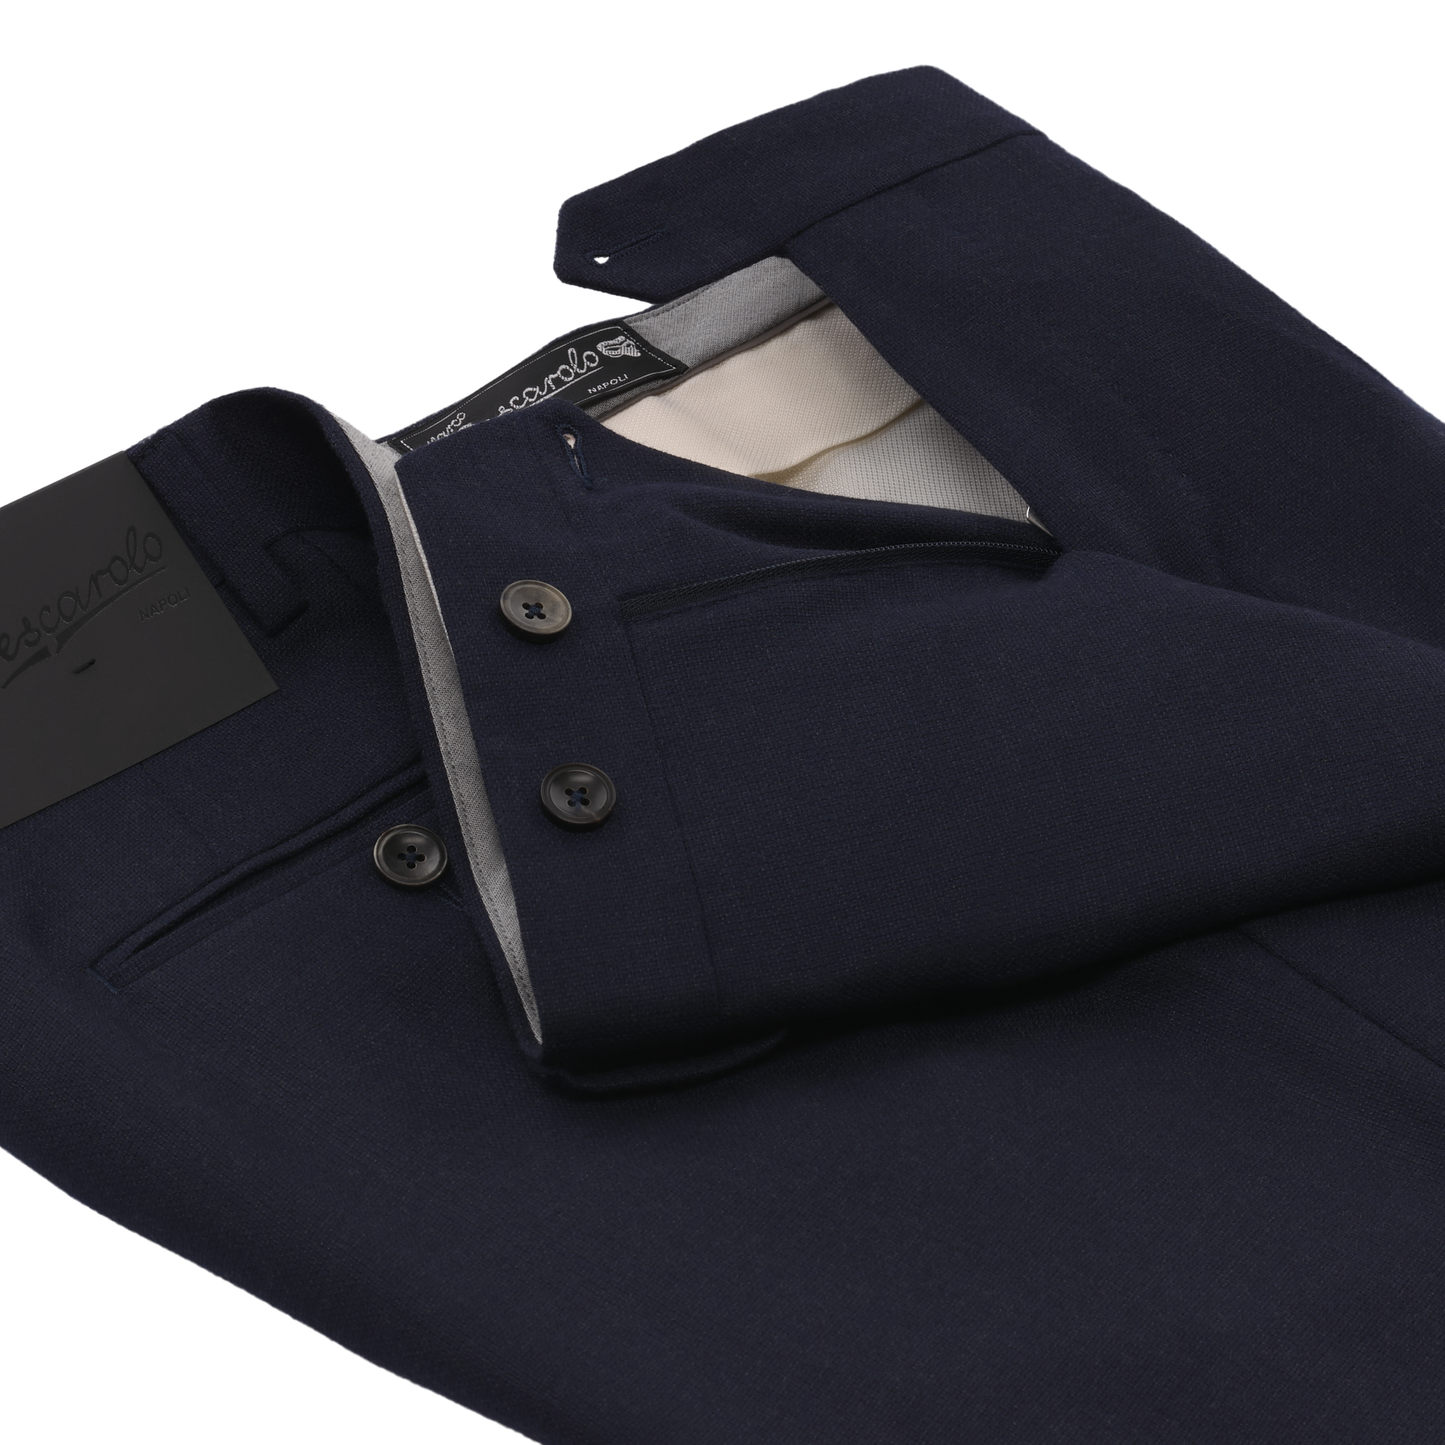 Marco Pescarolo Slim-Fit Virgin Wool and Cashmere-Blend Trousers - SARTALE